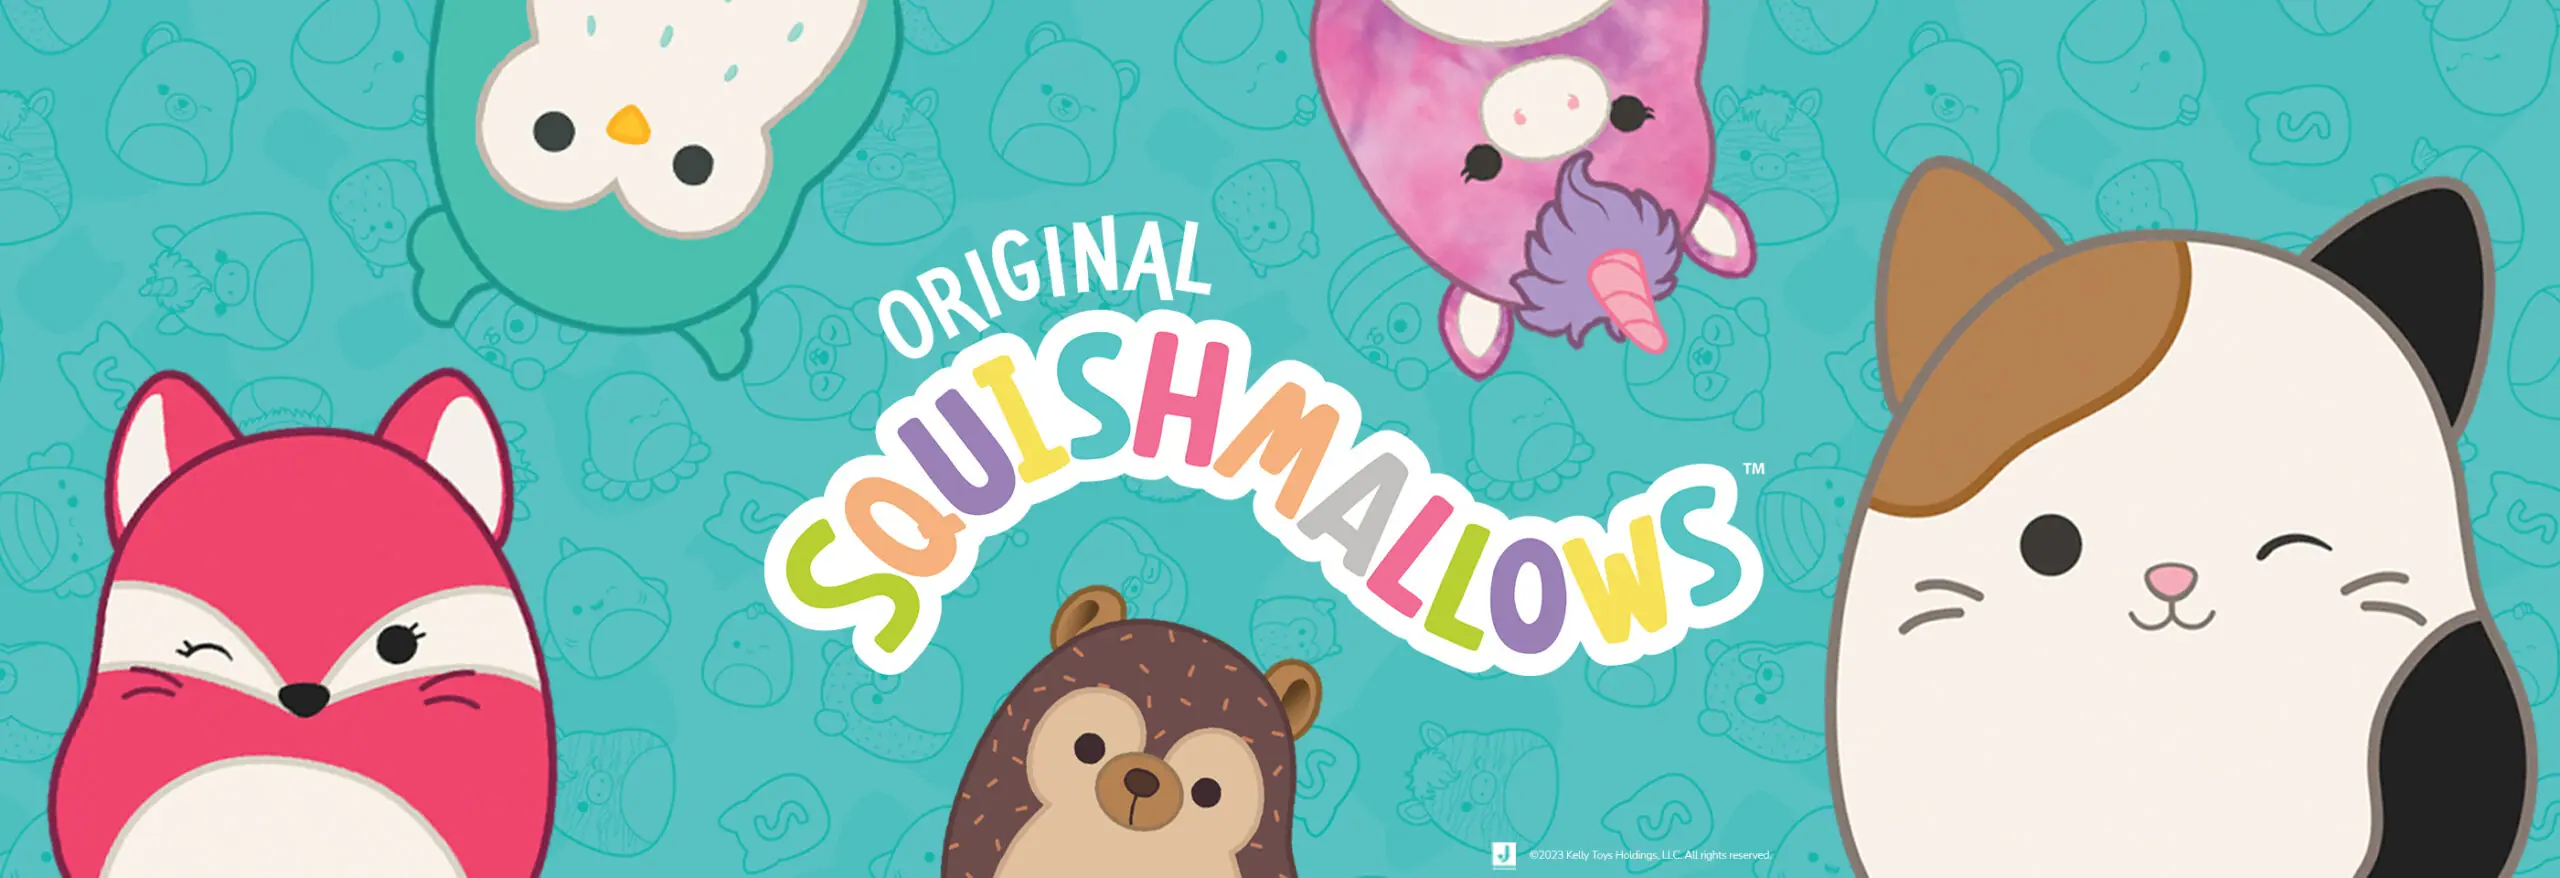 Be in to WIN Squishmallows Christmas Ornaments!